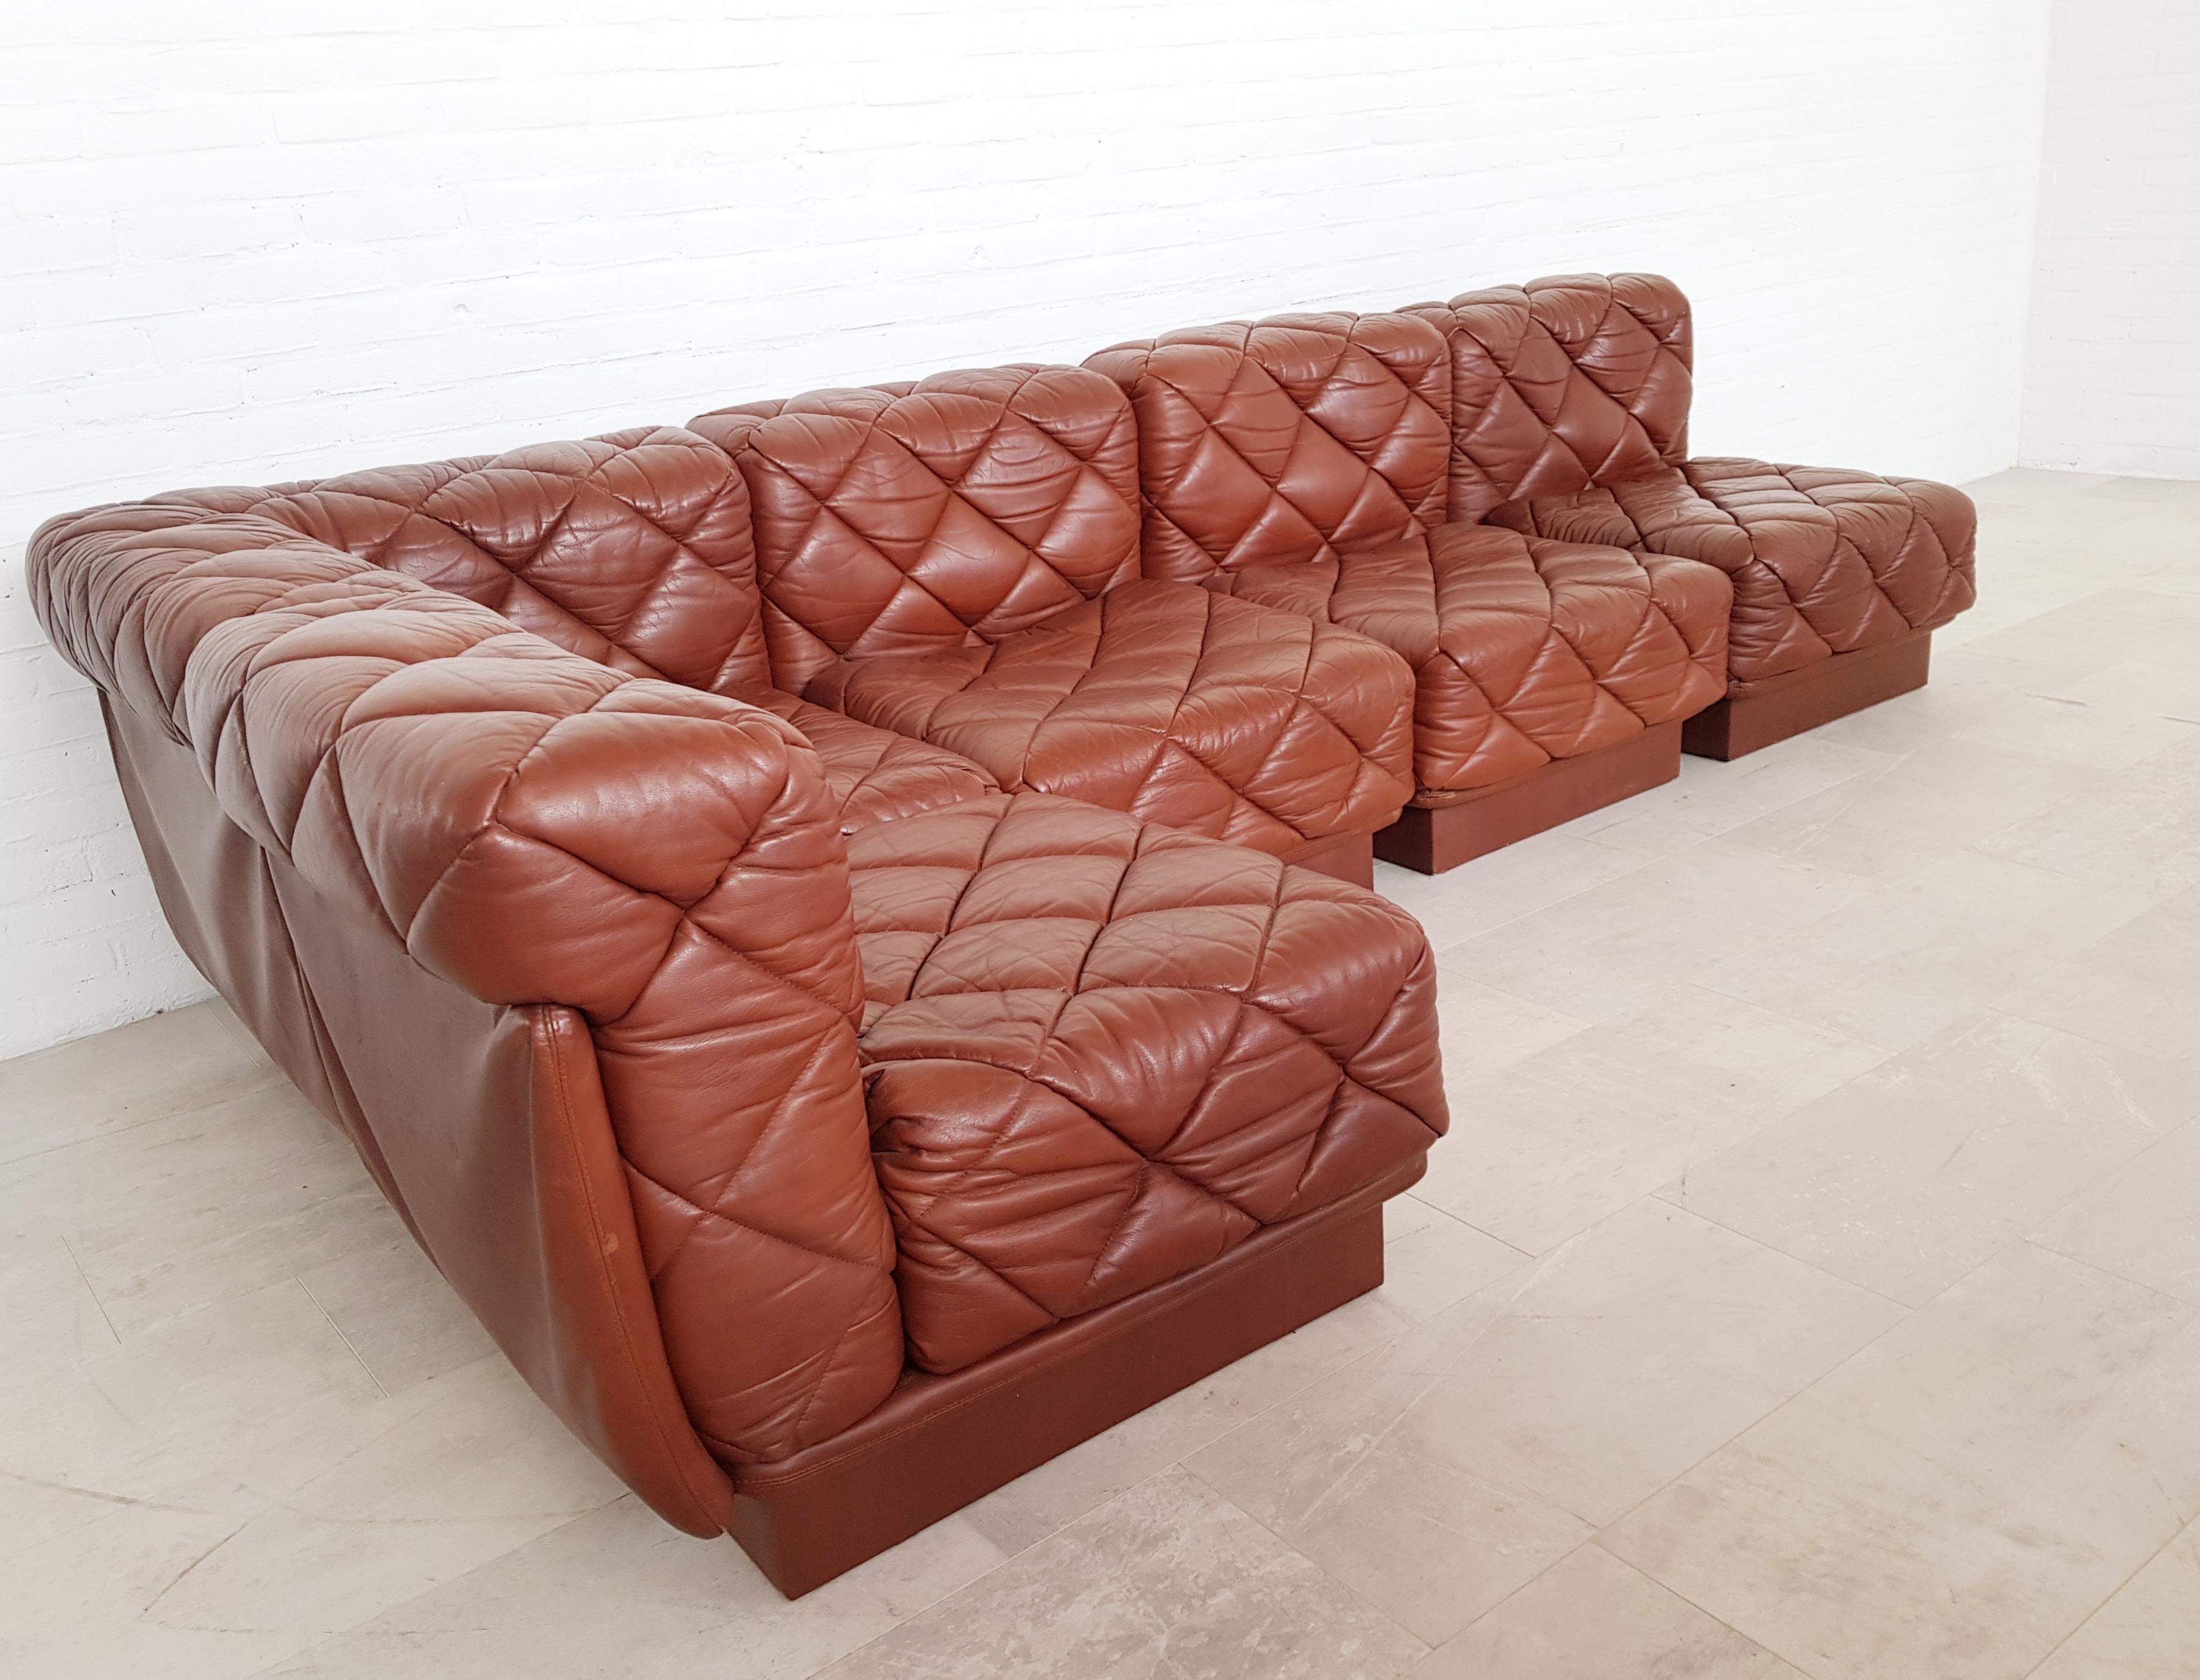 Modular sofa model ‘Rhombos’ designed by Karl Wittmann in 1973, manufactured by Wittmann Möbelwerkstätten, Austria.
Edited in a beautiful dark cognac colored high quality leather with quilted stitching. The elements can be arranged freely or suited